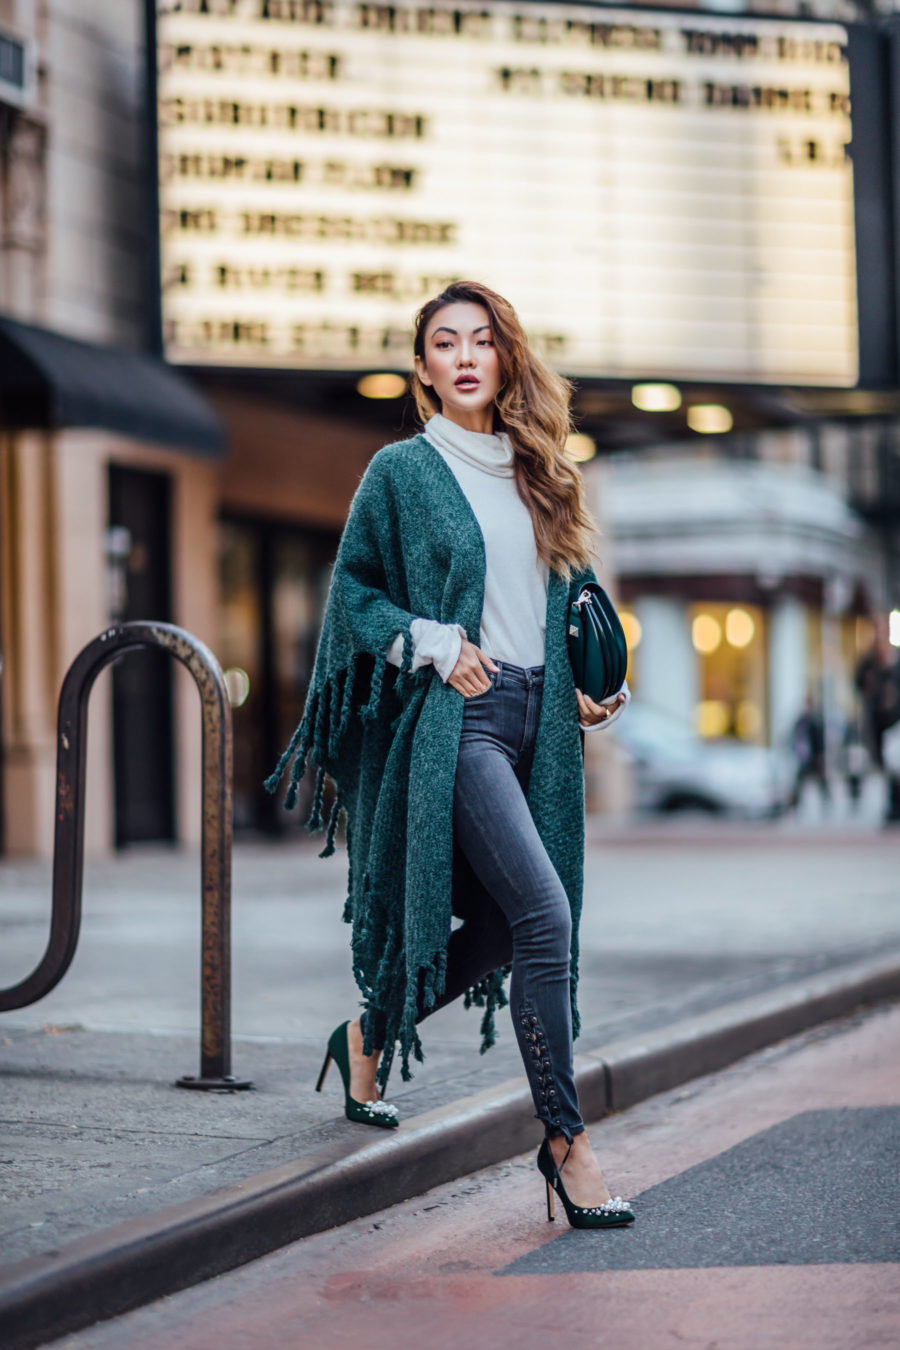 Fashion Details to Step Up Your Winter Look - Fringe Kimono, Lace up jeans, embellished pumps // Notjessfashion // Jessica wang, winter outfits, stylish winter outfit, fashion blogger, street style, winter street style, green satin pumps, nine west heels, fringe details, asian blogger